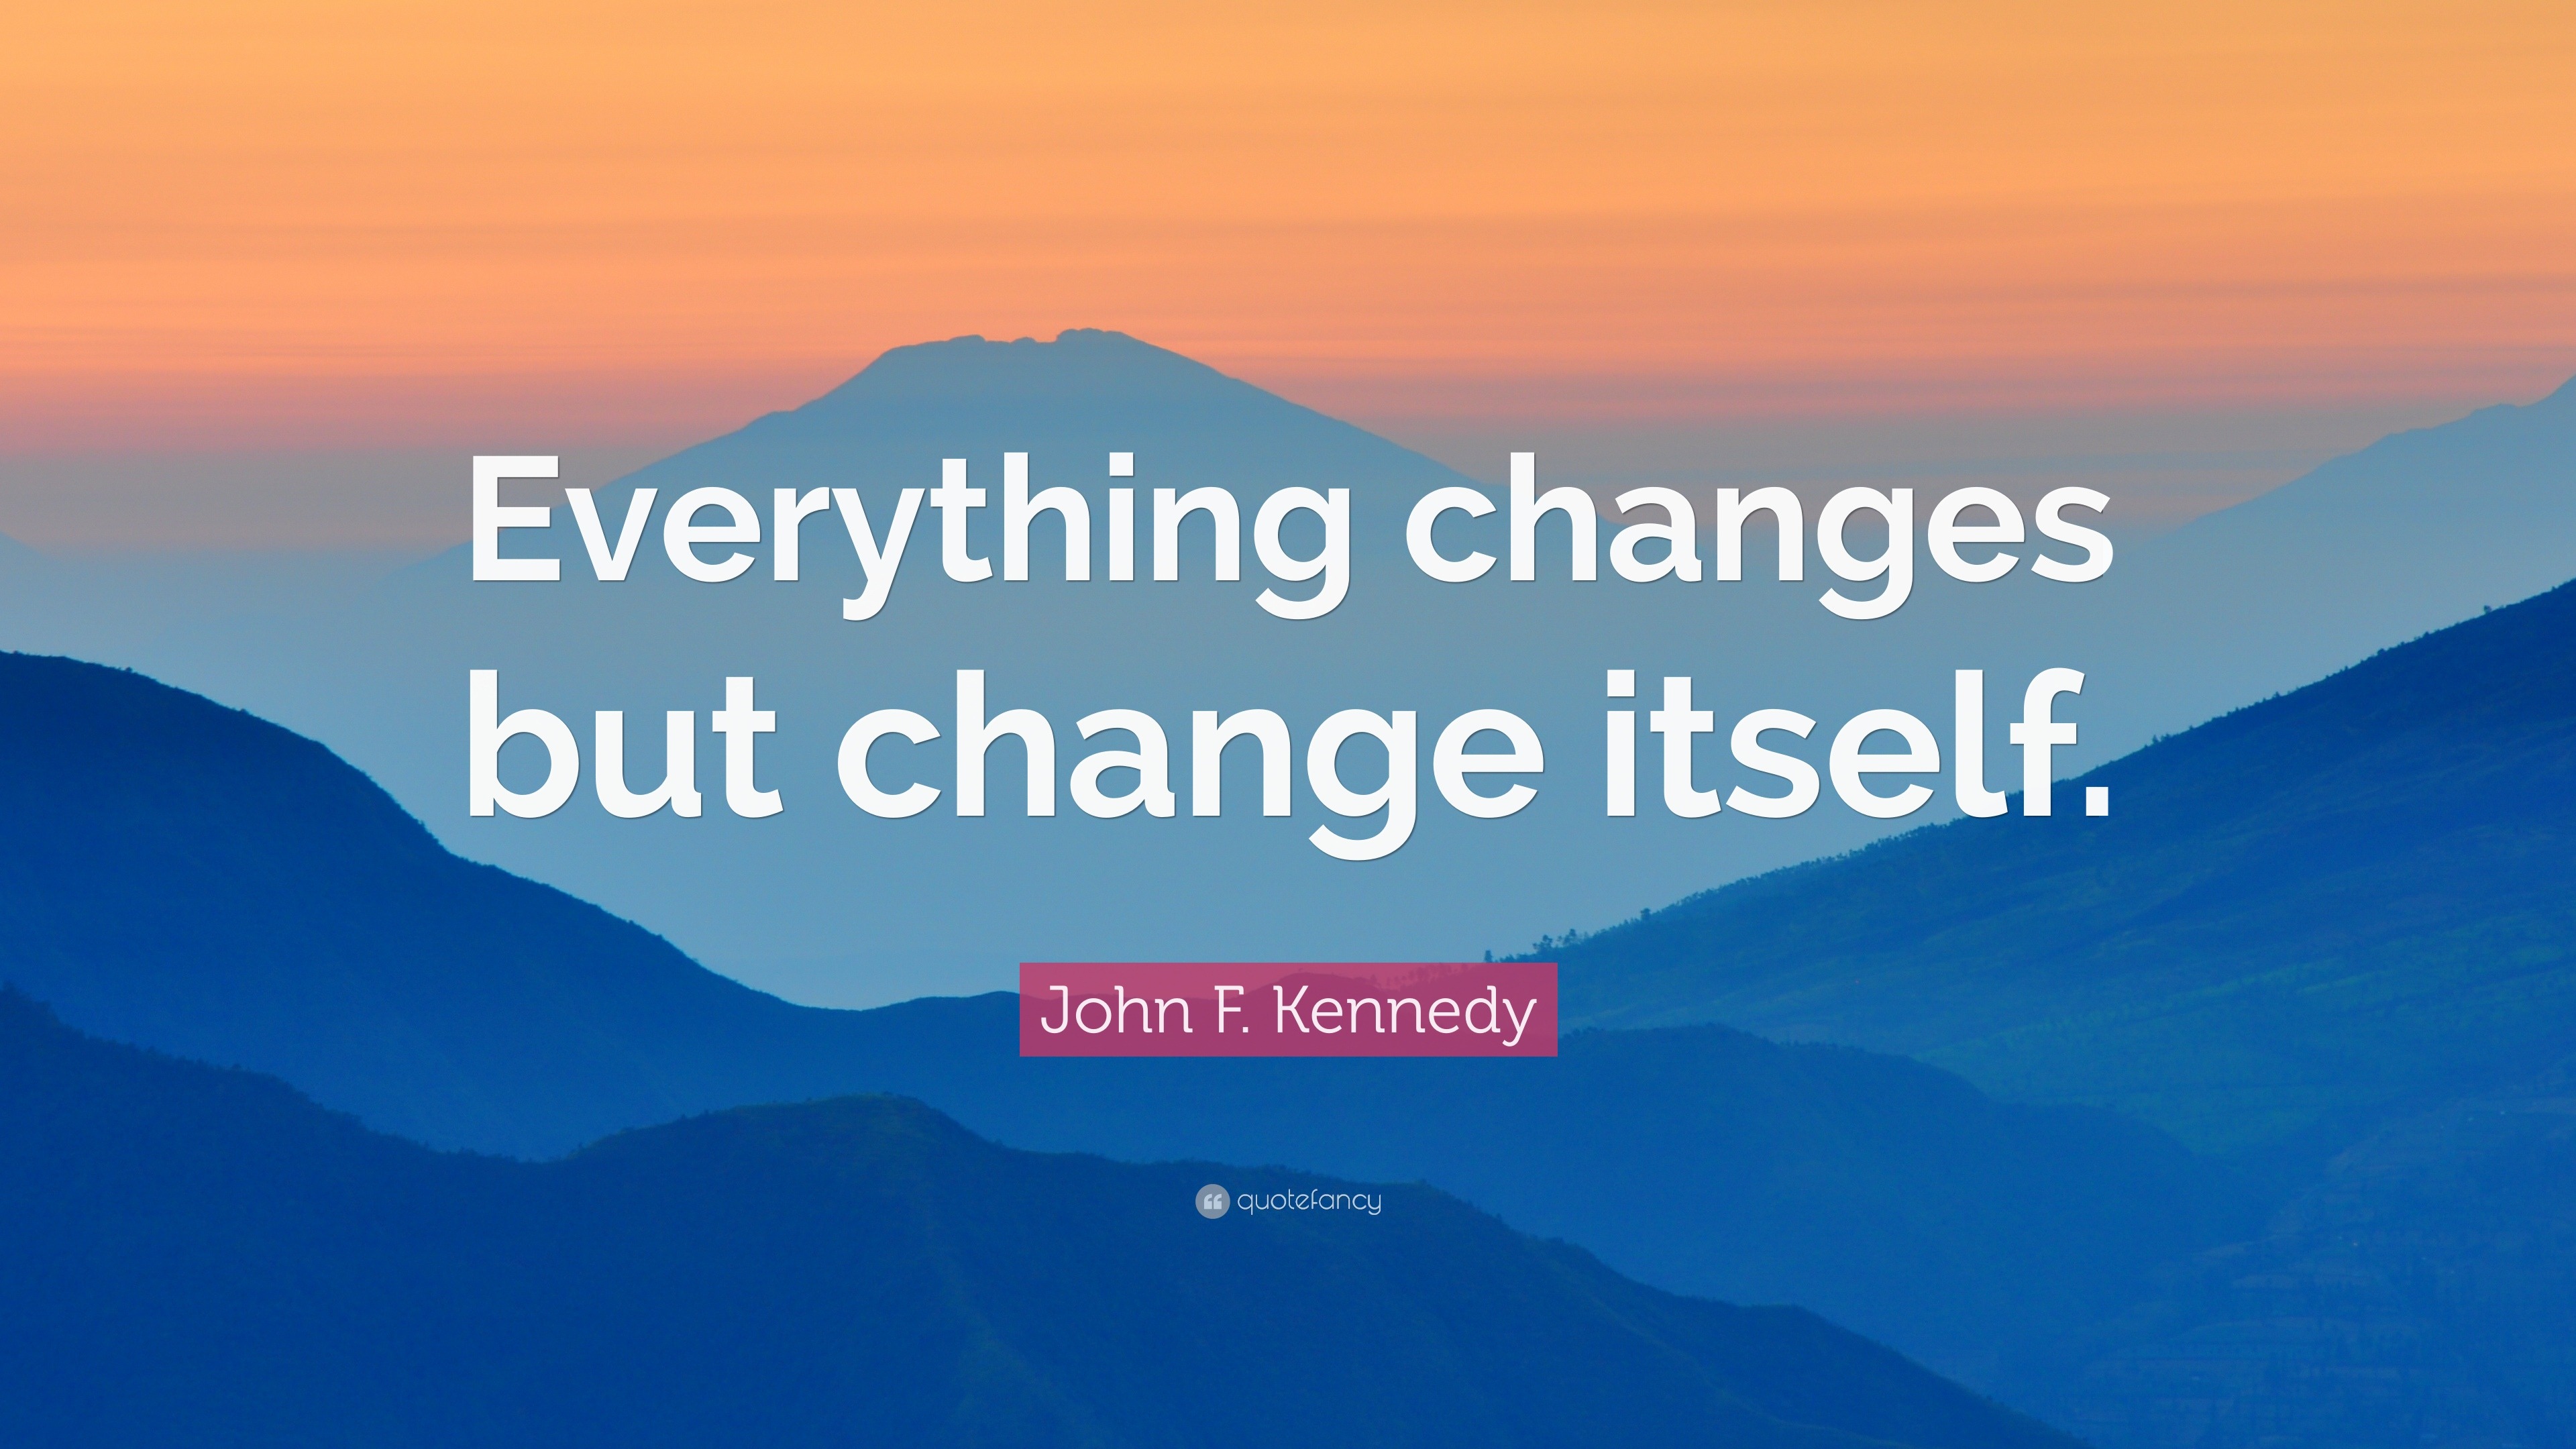 74615-John-F-Kennedy-Quote-Everything-changes-but-change-itself.jpg